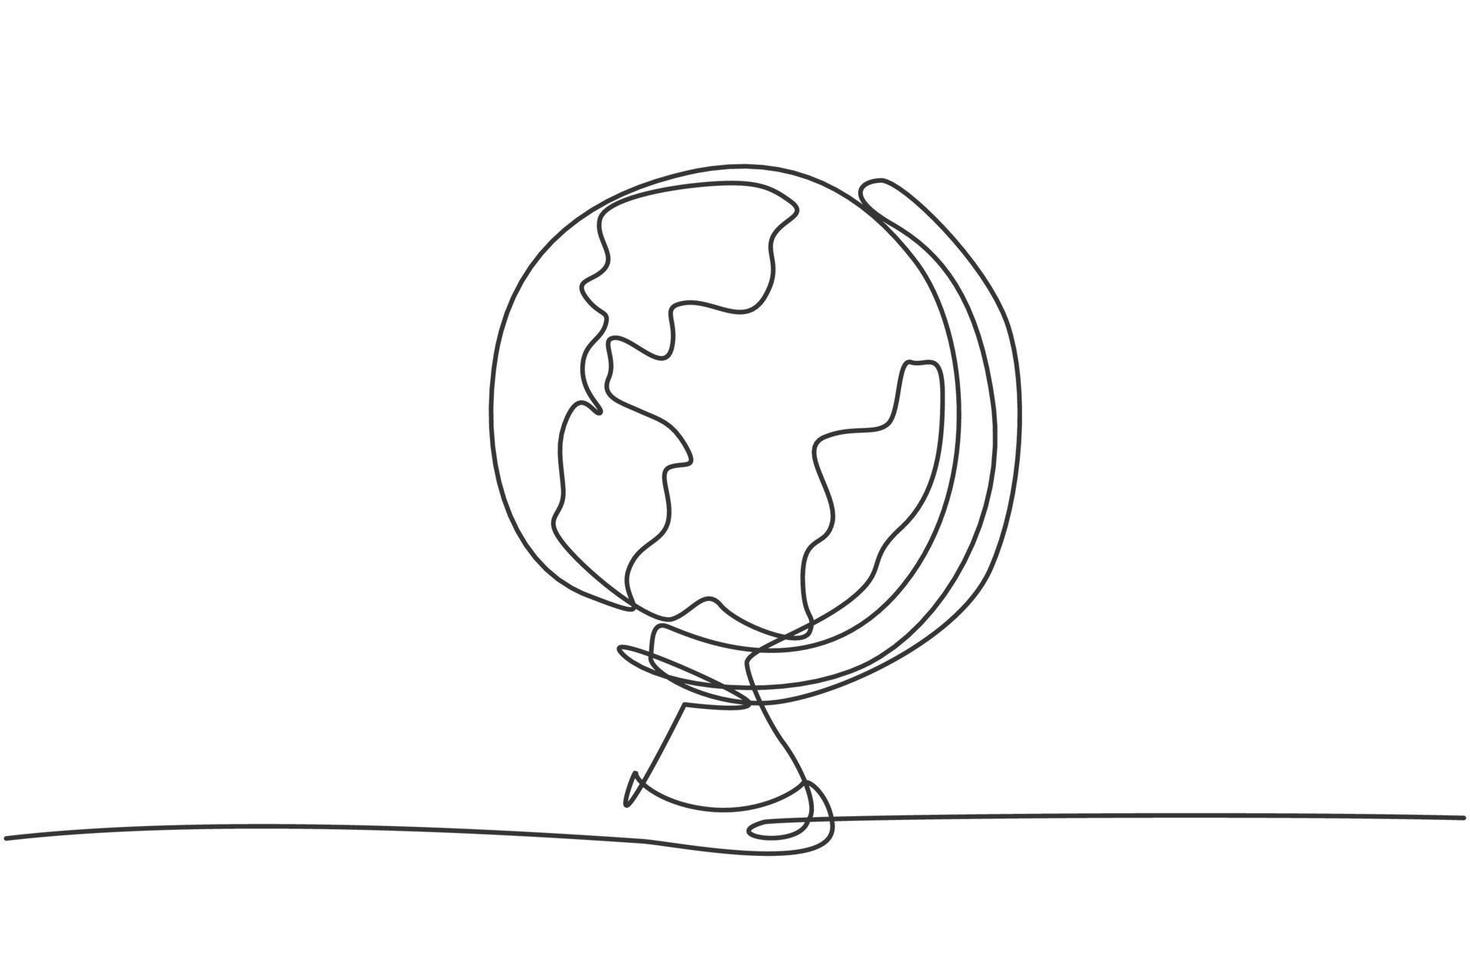 Continuous one line drawing round world globe map. Back to school hand drawn minimalism concept. Single line draw design for geography education vector graphic illustration